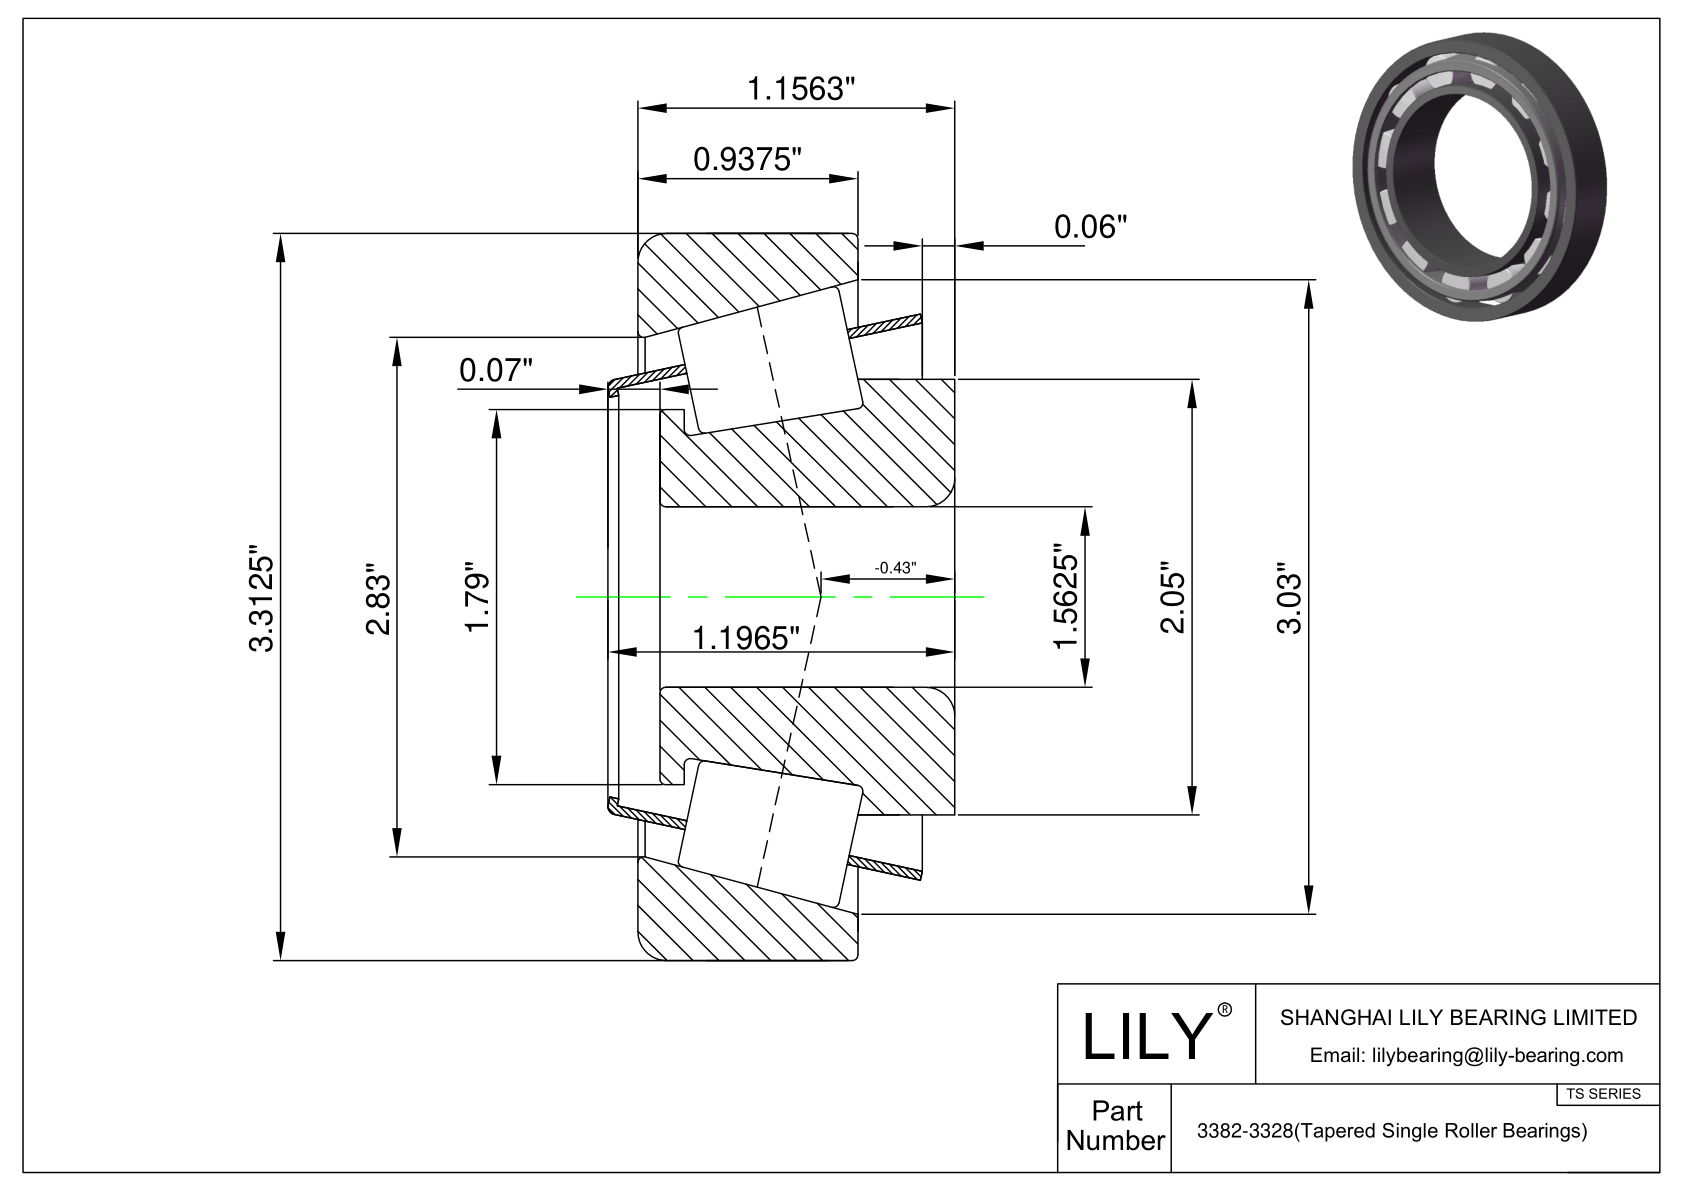 3382-3328 TS (Tapered Single Roller Bearings) (Imperial) cad drawing